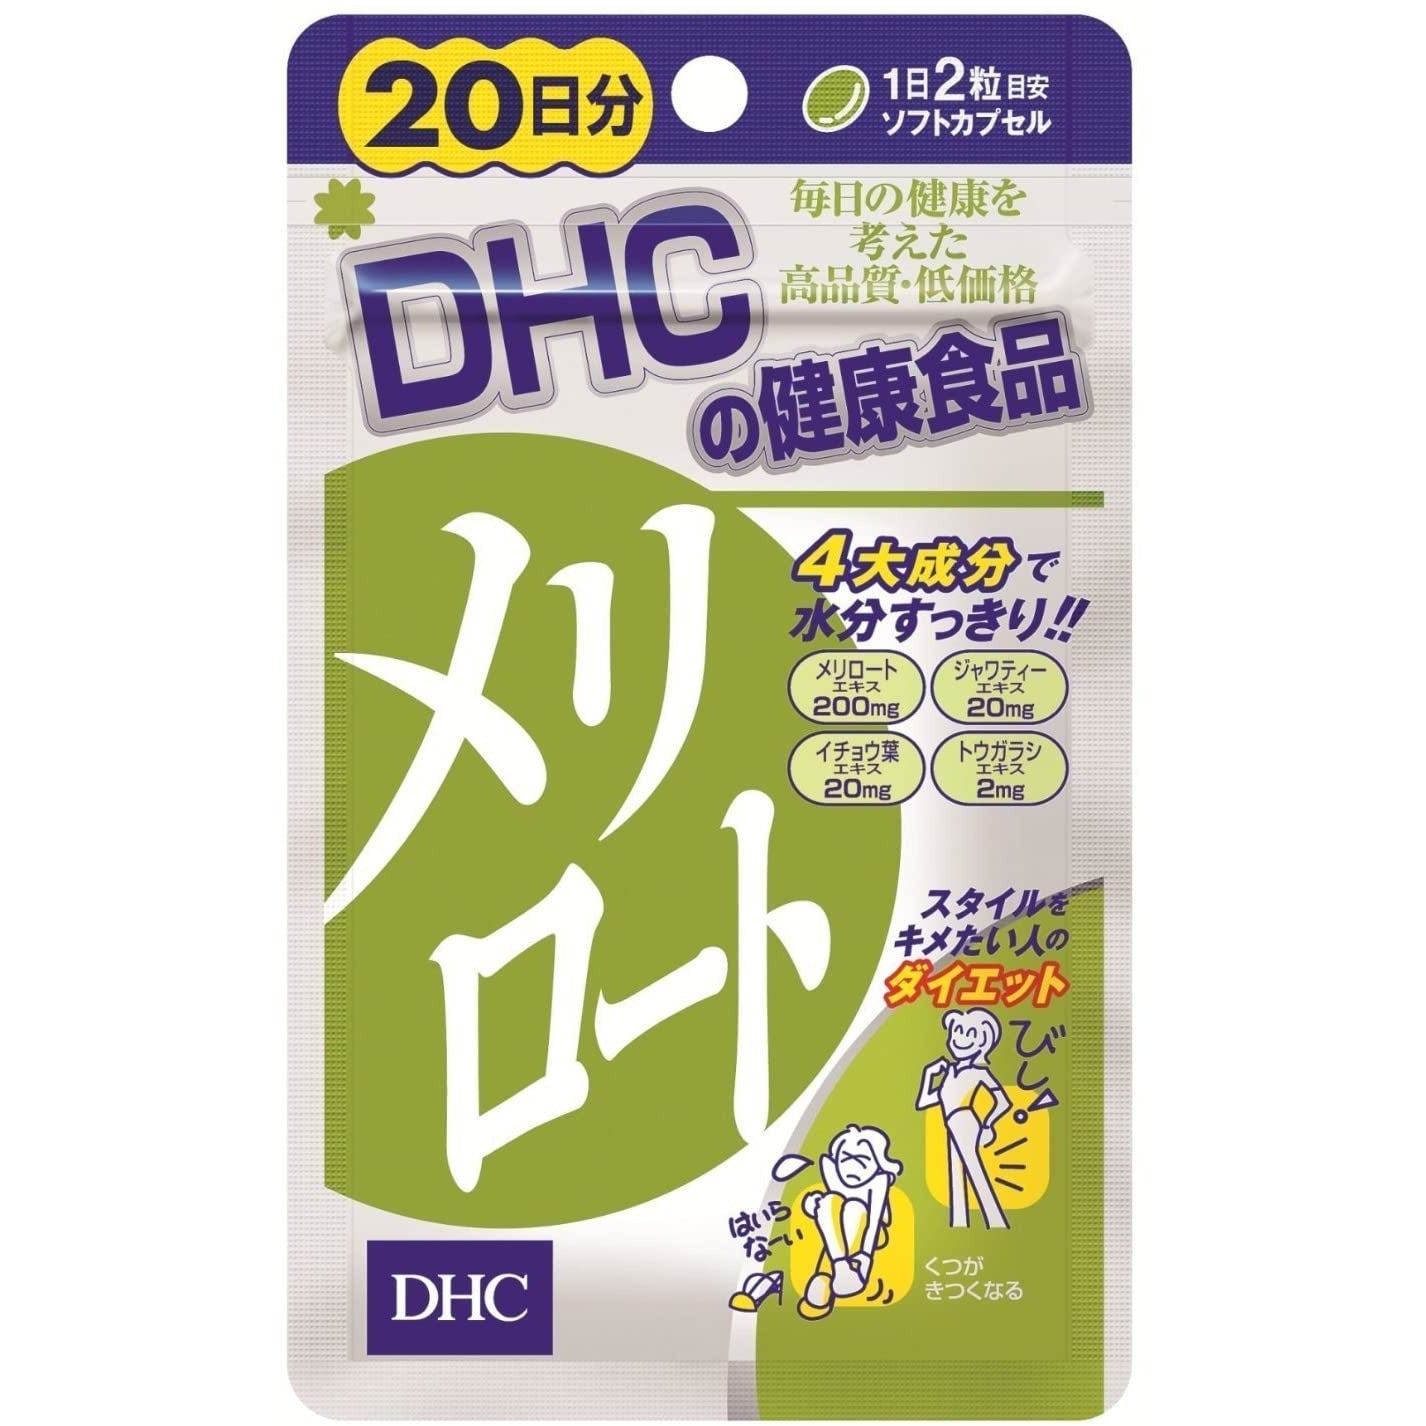 DHC Melilot Dietary Supplement for legs slim 20days 40tablets Japan